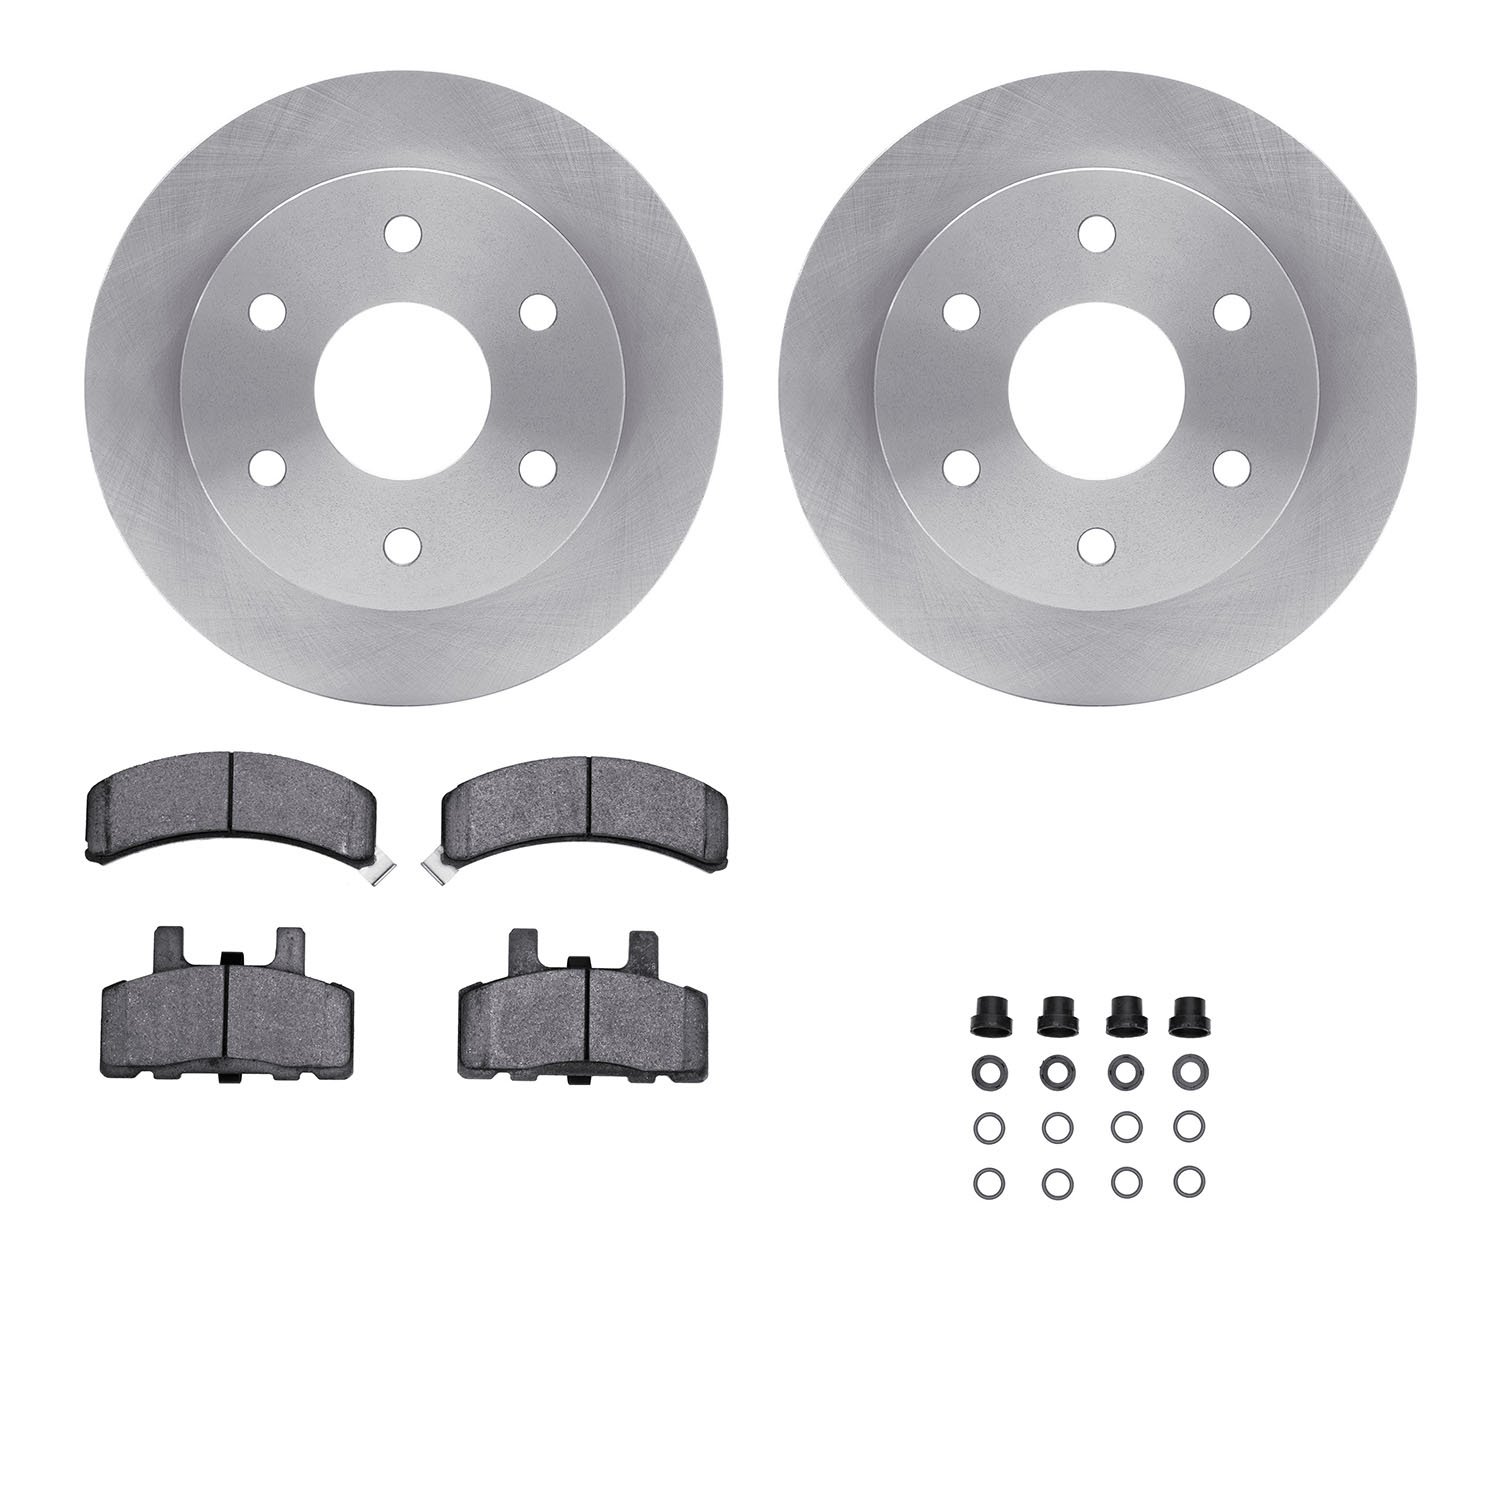 6412-48010 Brake Rotors with Ultimate-Duty Brake Pads Kit & Hardware, 1988-2000 GM, Position: Front